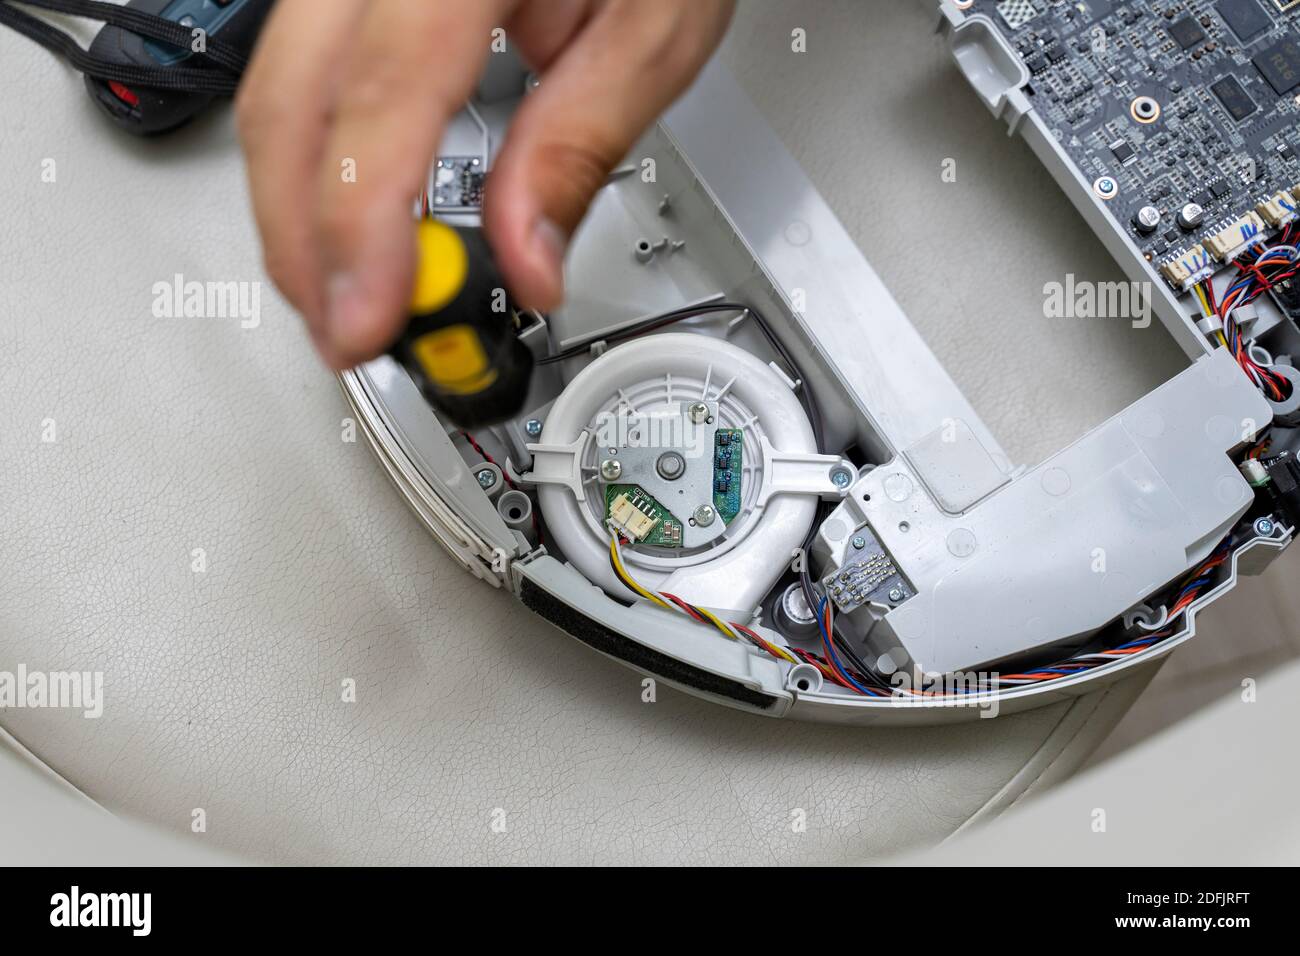 robot vacuum cleaner repair. A man is fixing robot vacuum cleaner during  open the cover showing an electronics circuit board in side the machine  Stock Photo - Alamy